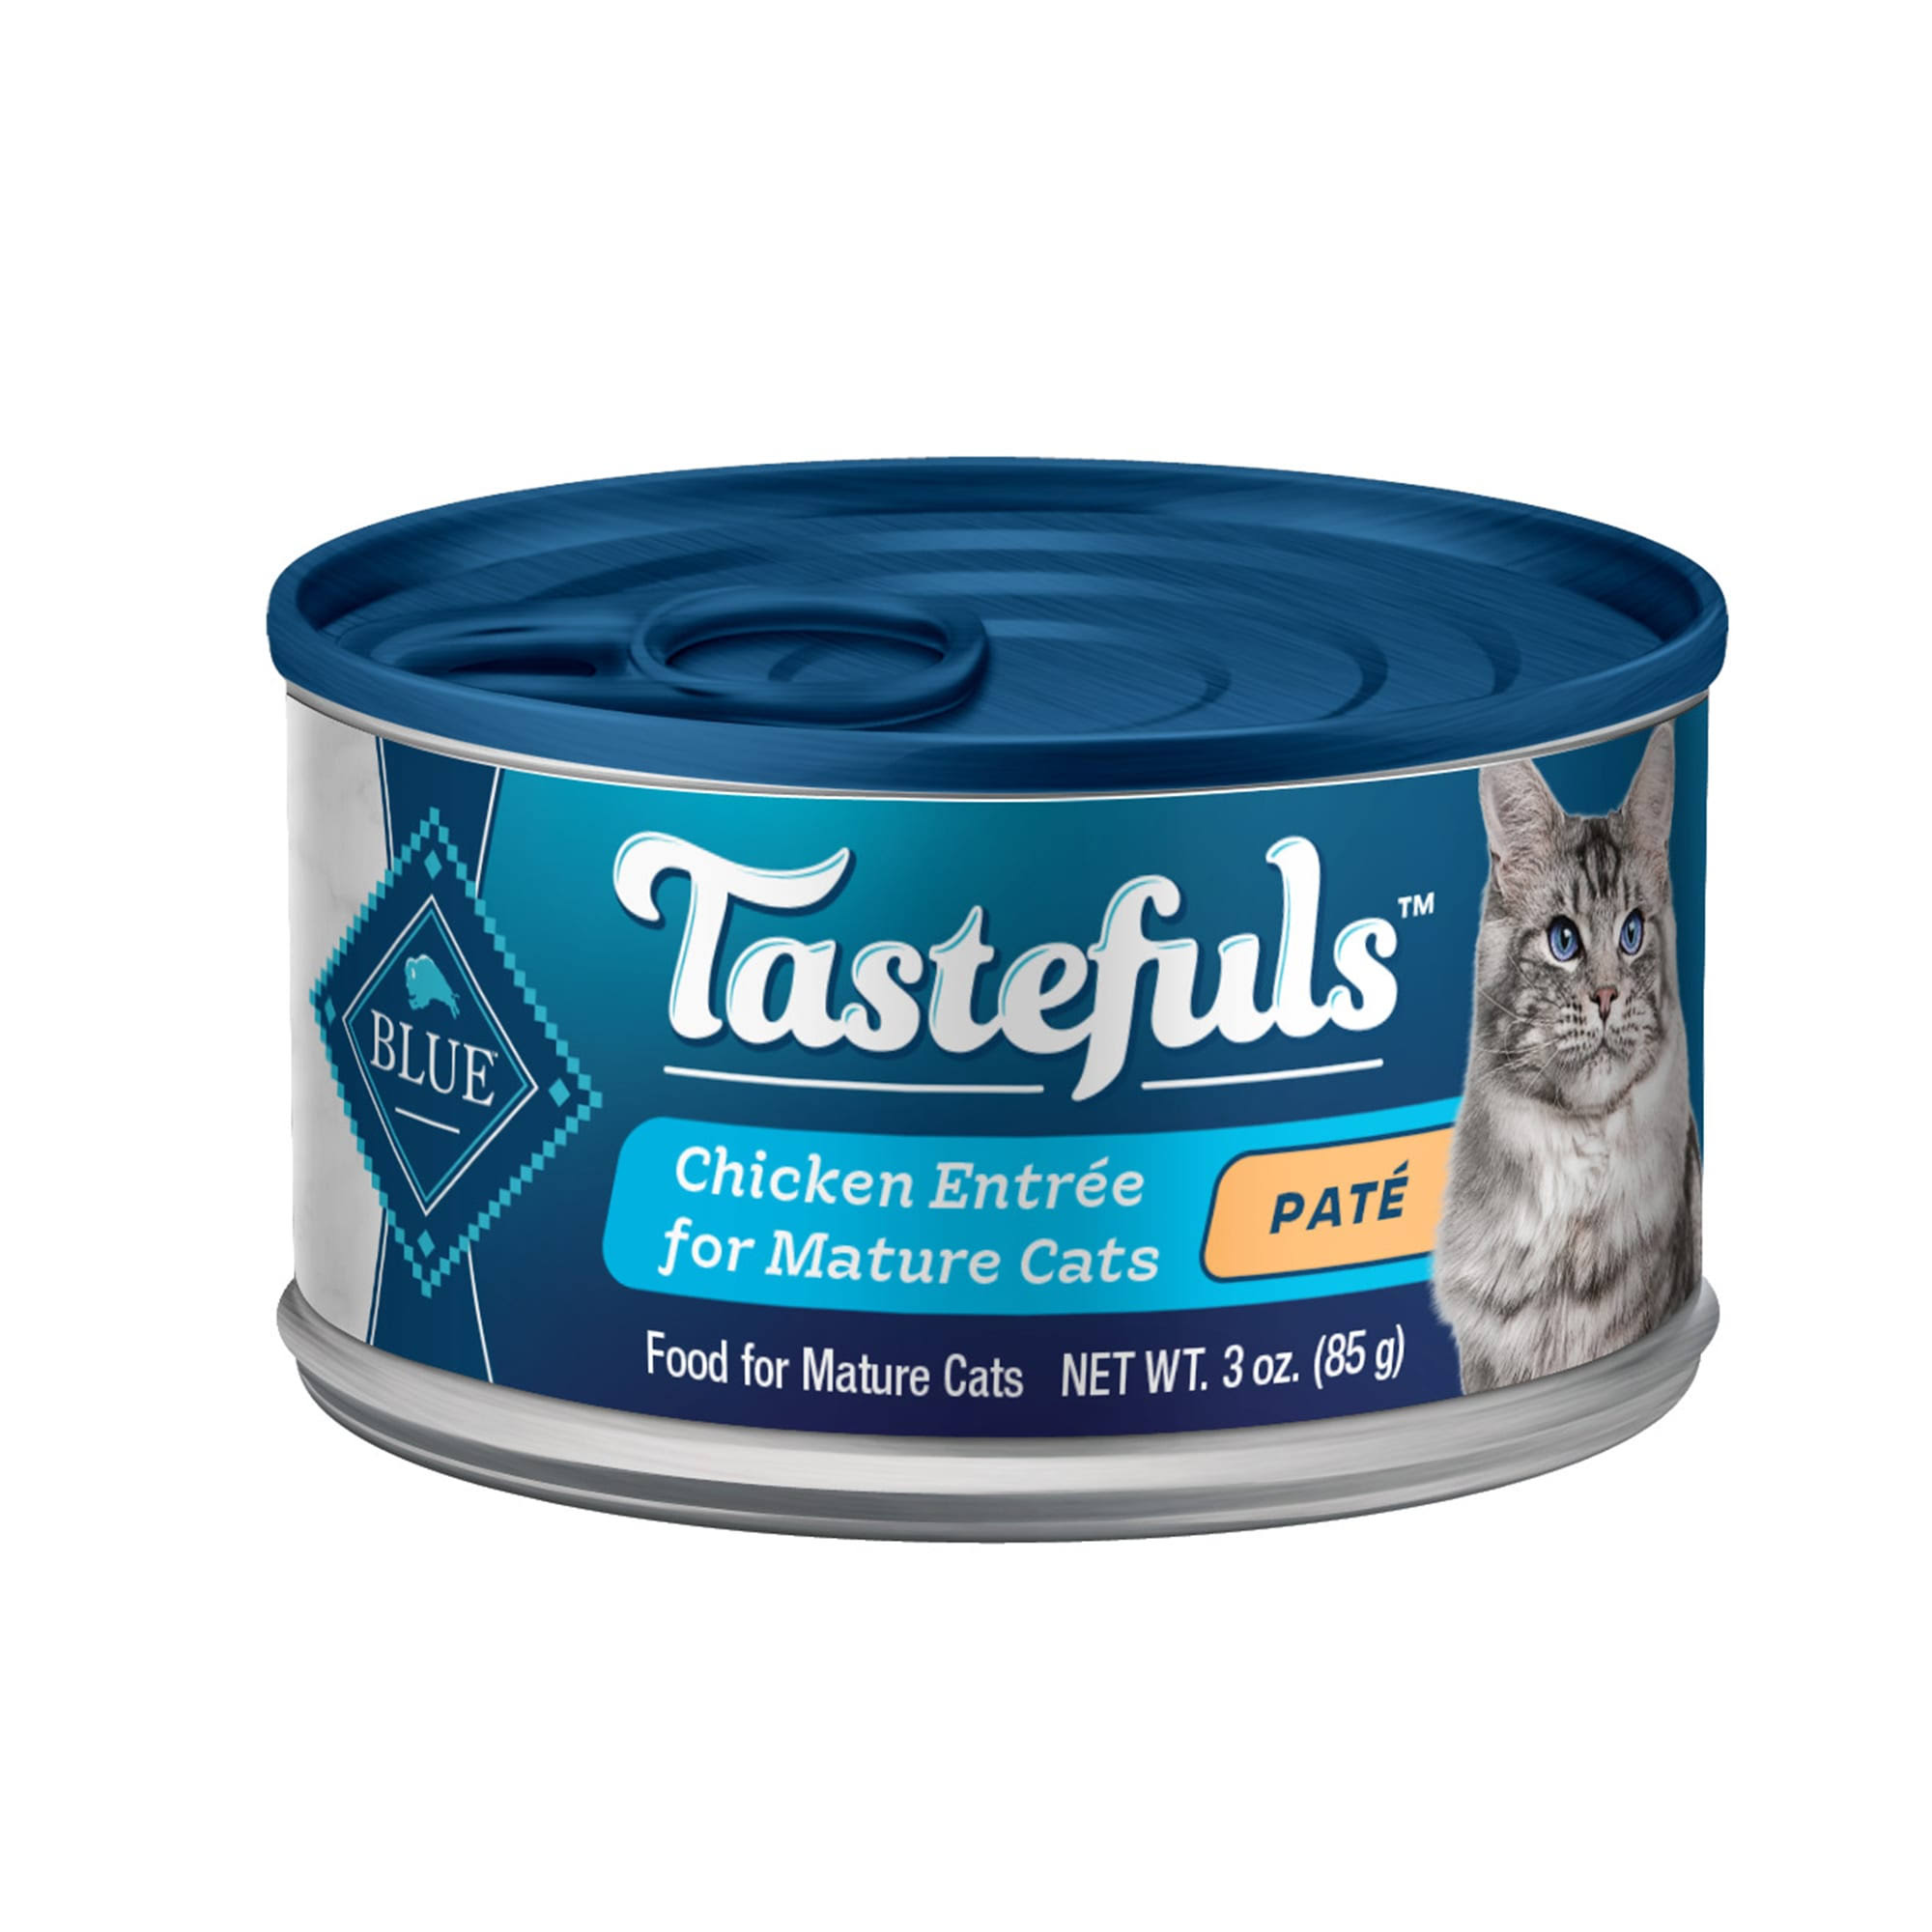 Blue Buffalo Blue Tastefuls Food for Mature Cats, Chicken Entree, Pate - 3 oz